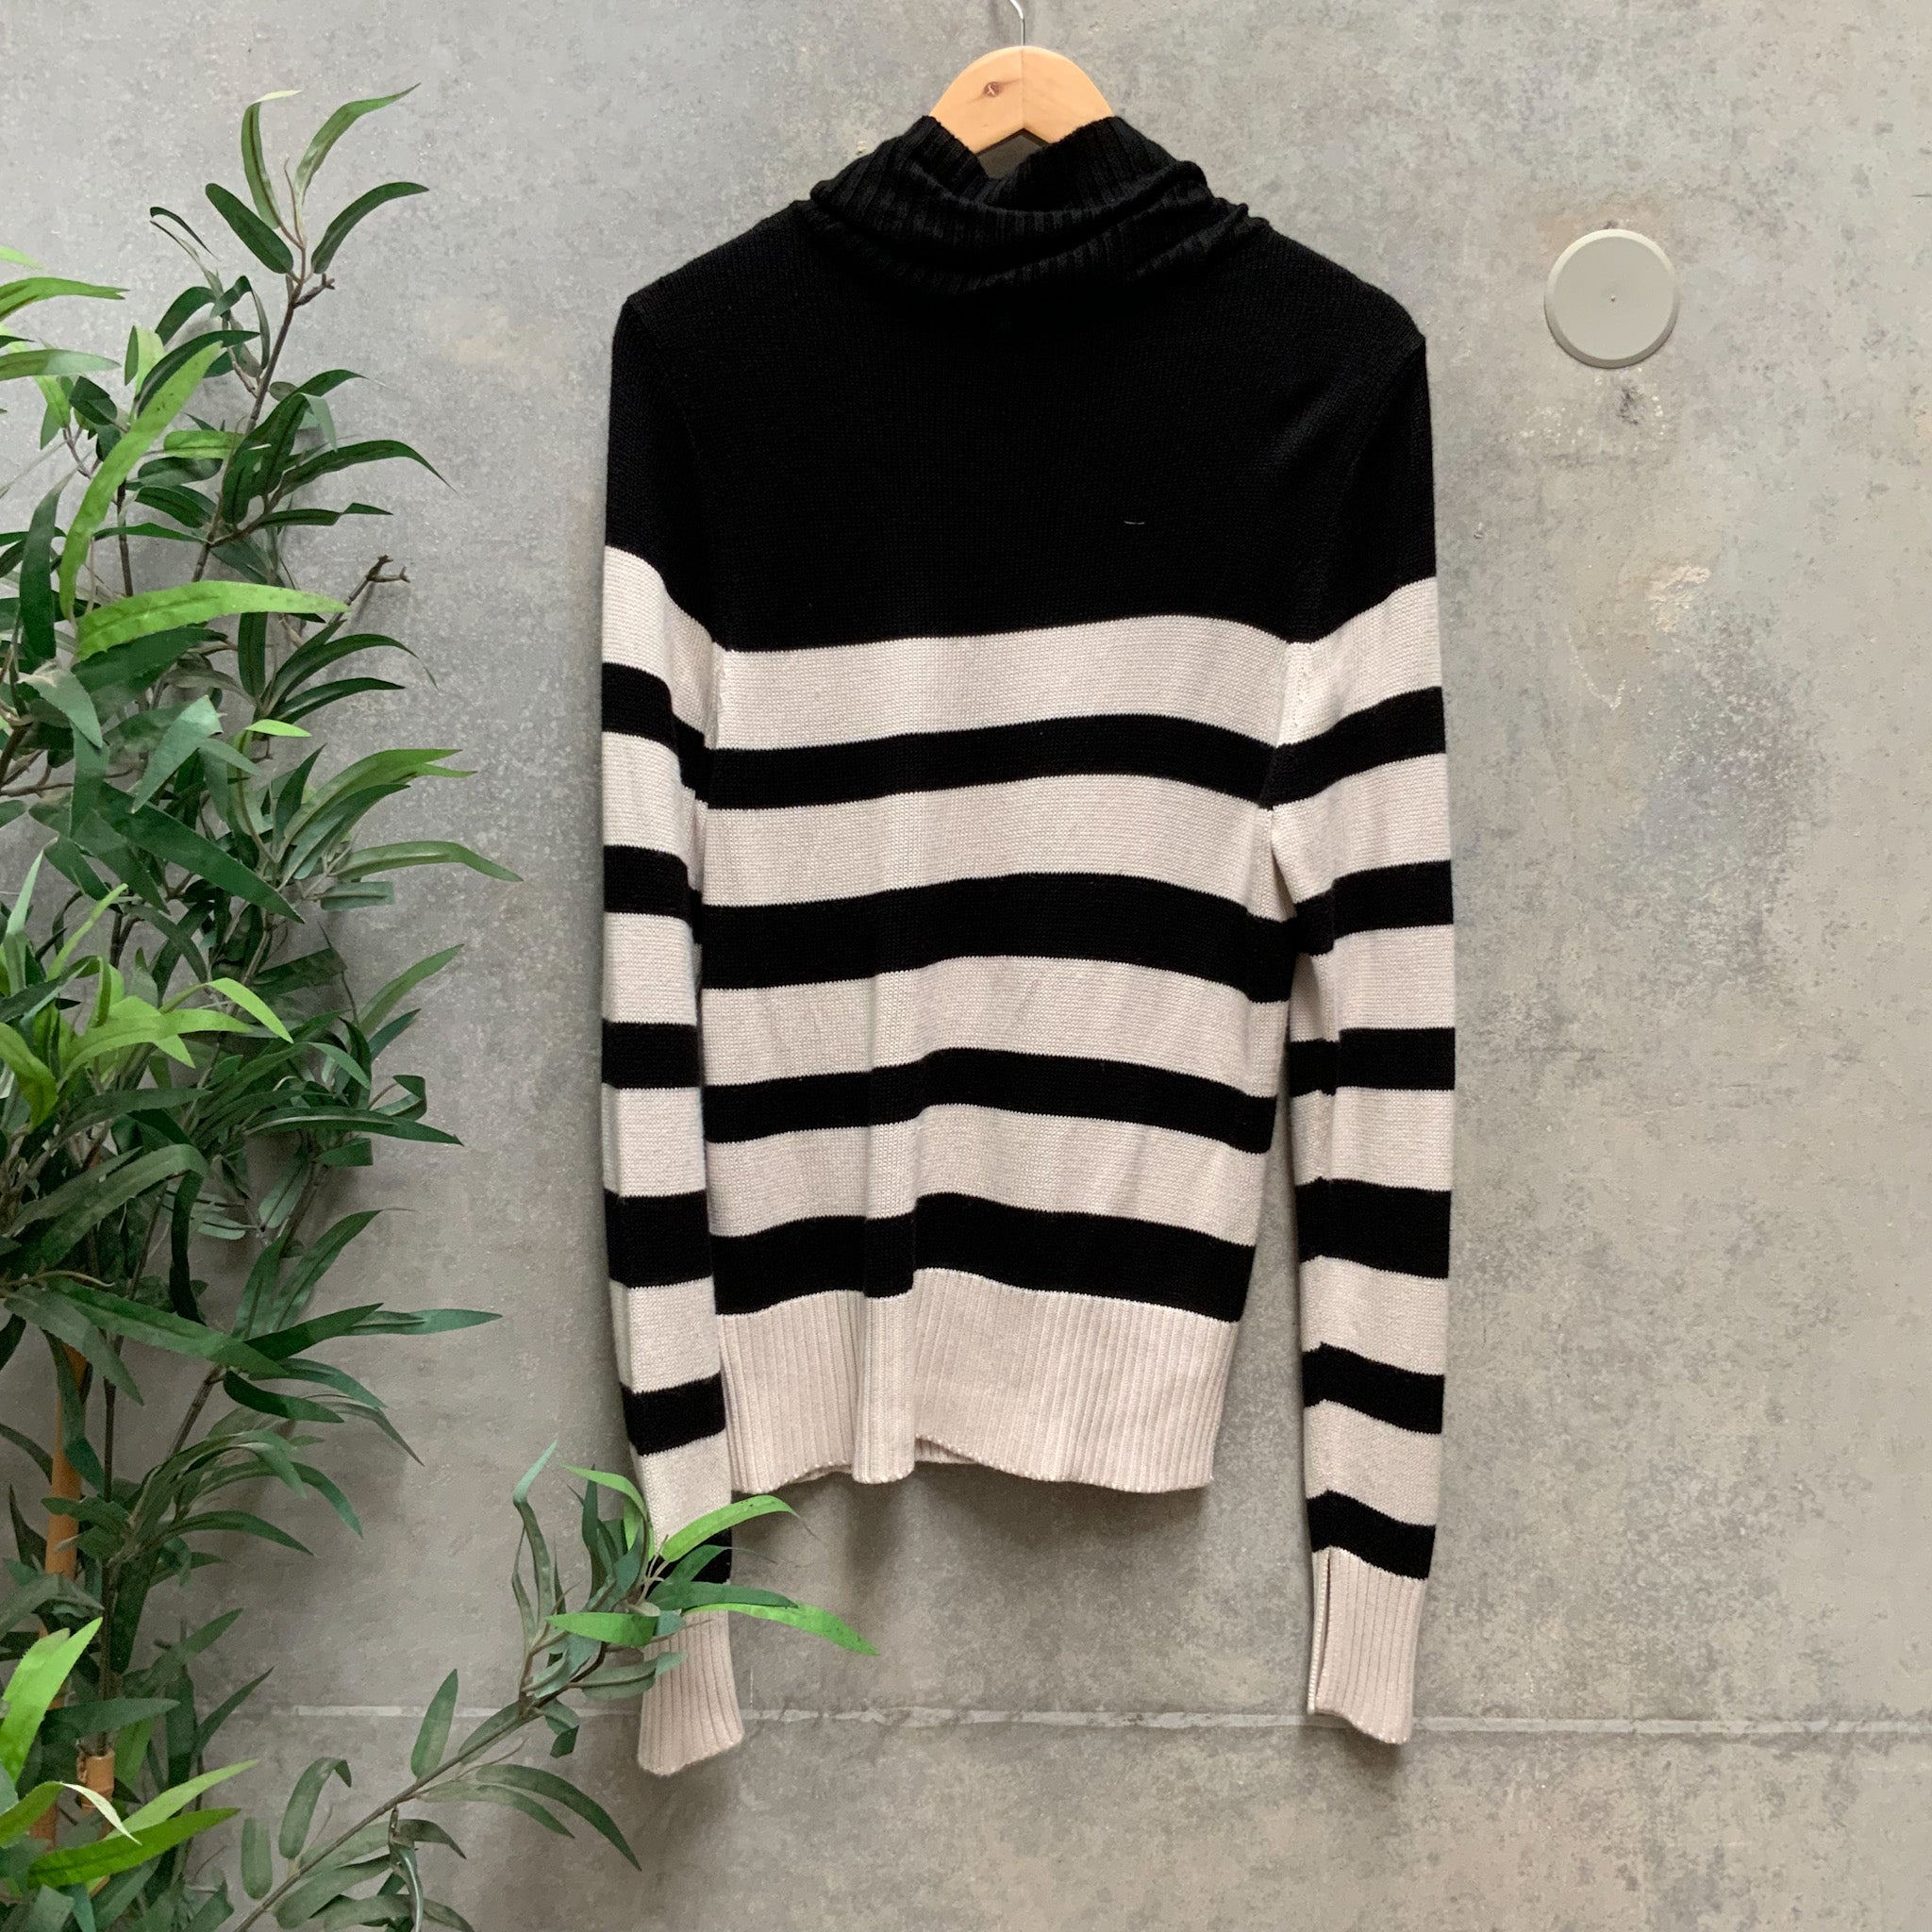 TABLE EIGHT Ladies Black and White Striped Sweater - Size XL